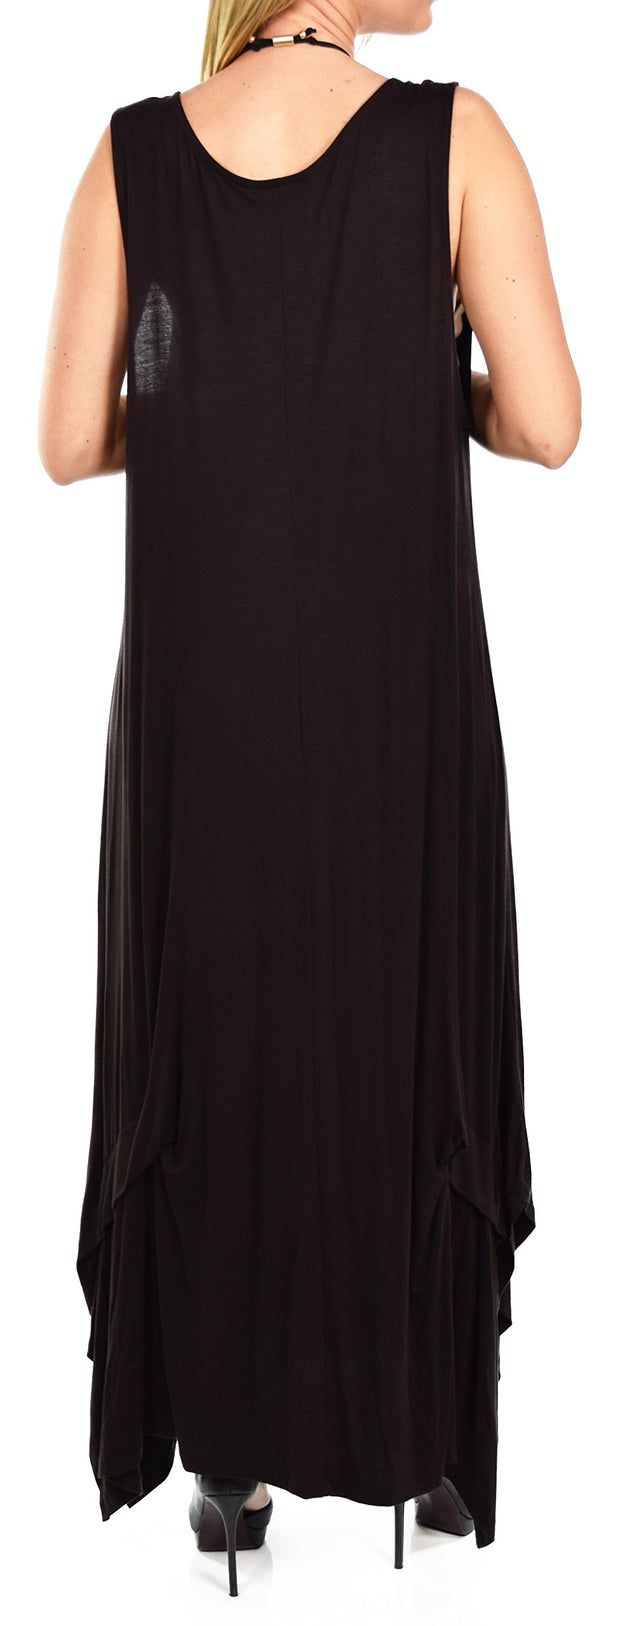 Sleeveless Loose Fitting Maxi Summer Dress in Plus Sizes